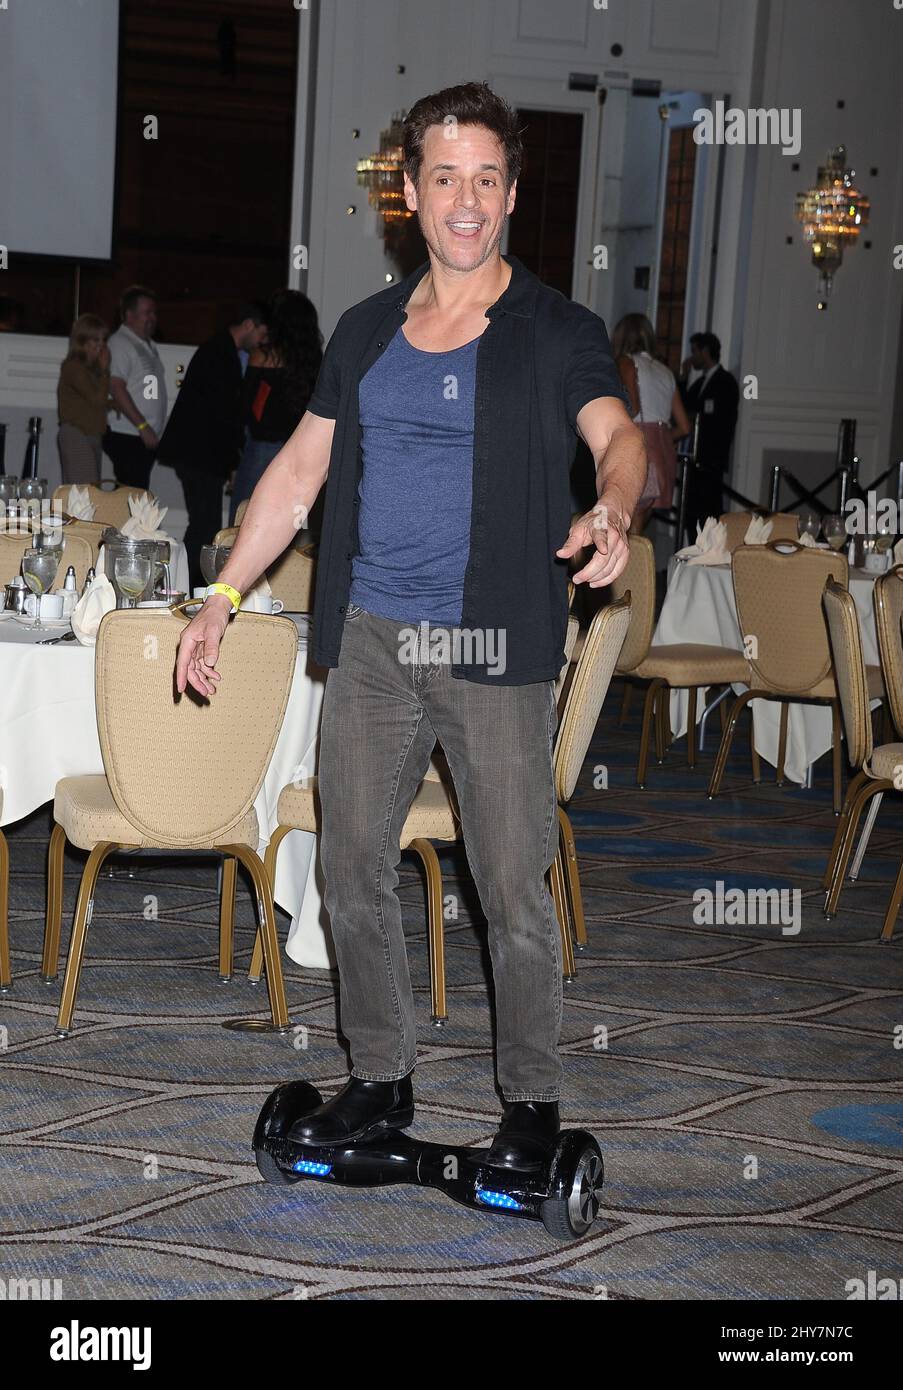 Christian LeBlanc attending 'The Young and the Restless' Fan Club Event Stock Photo